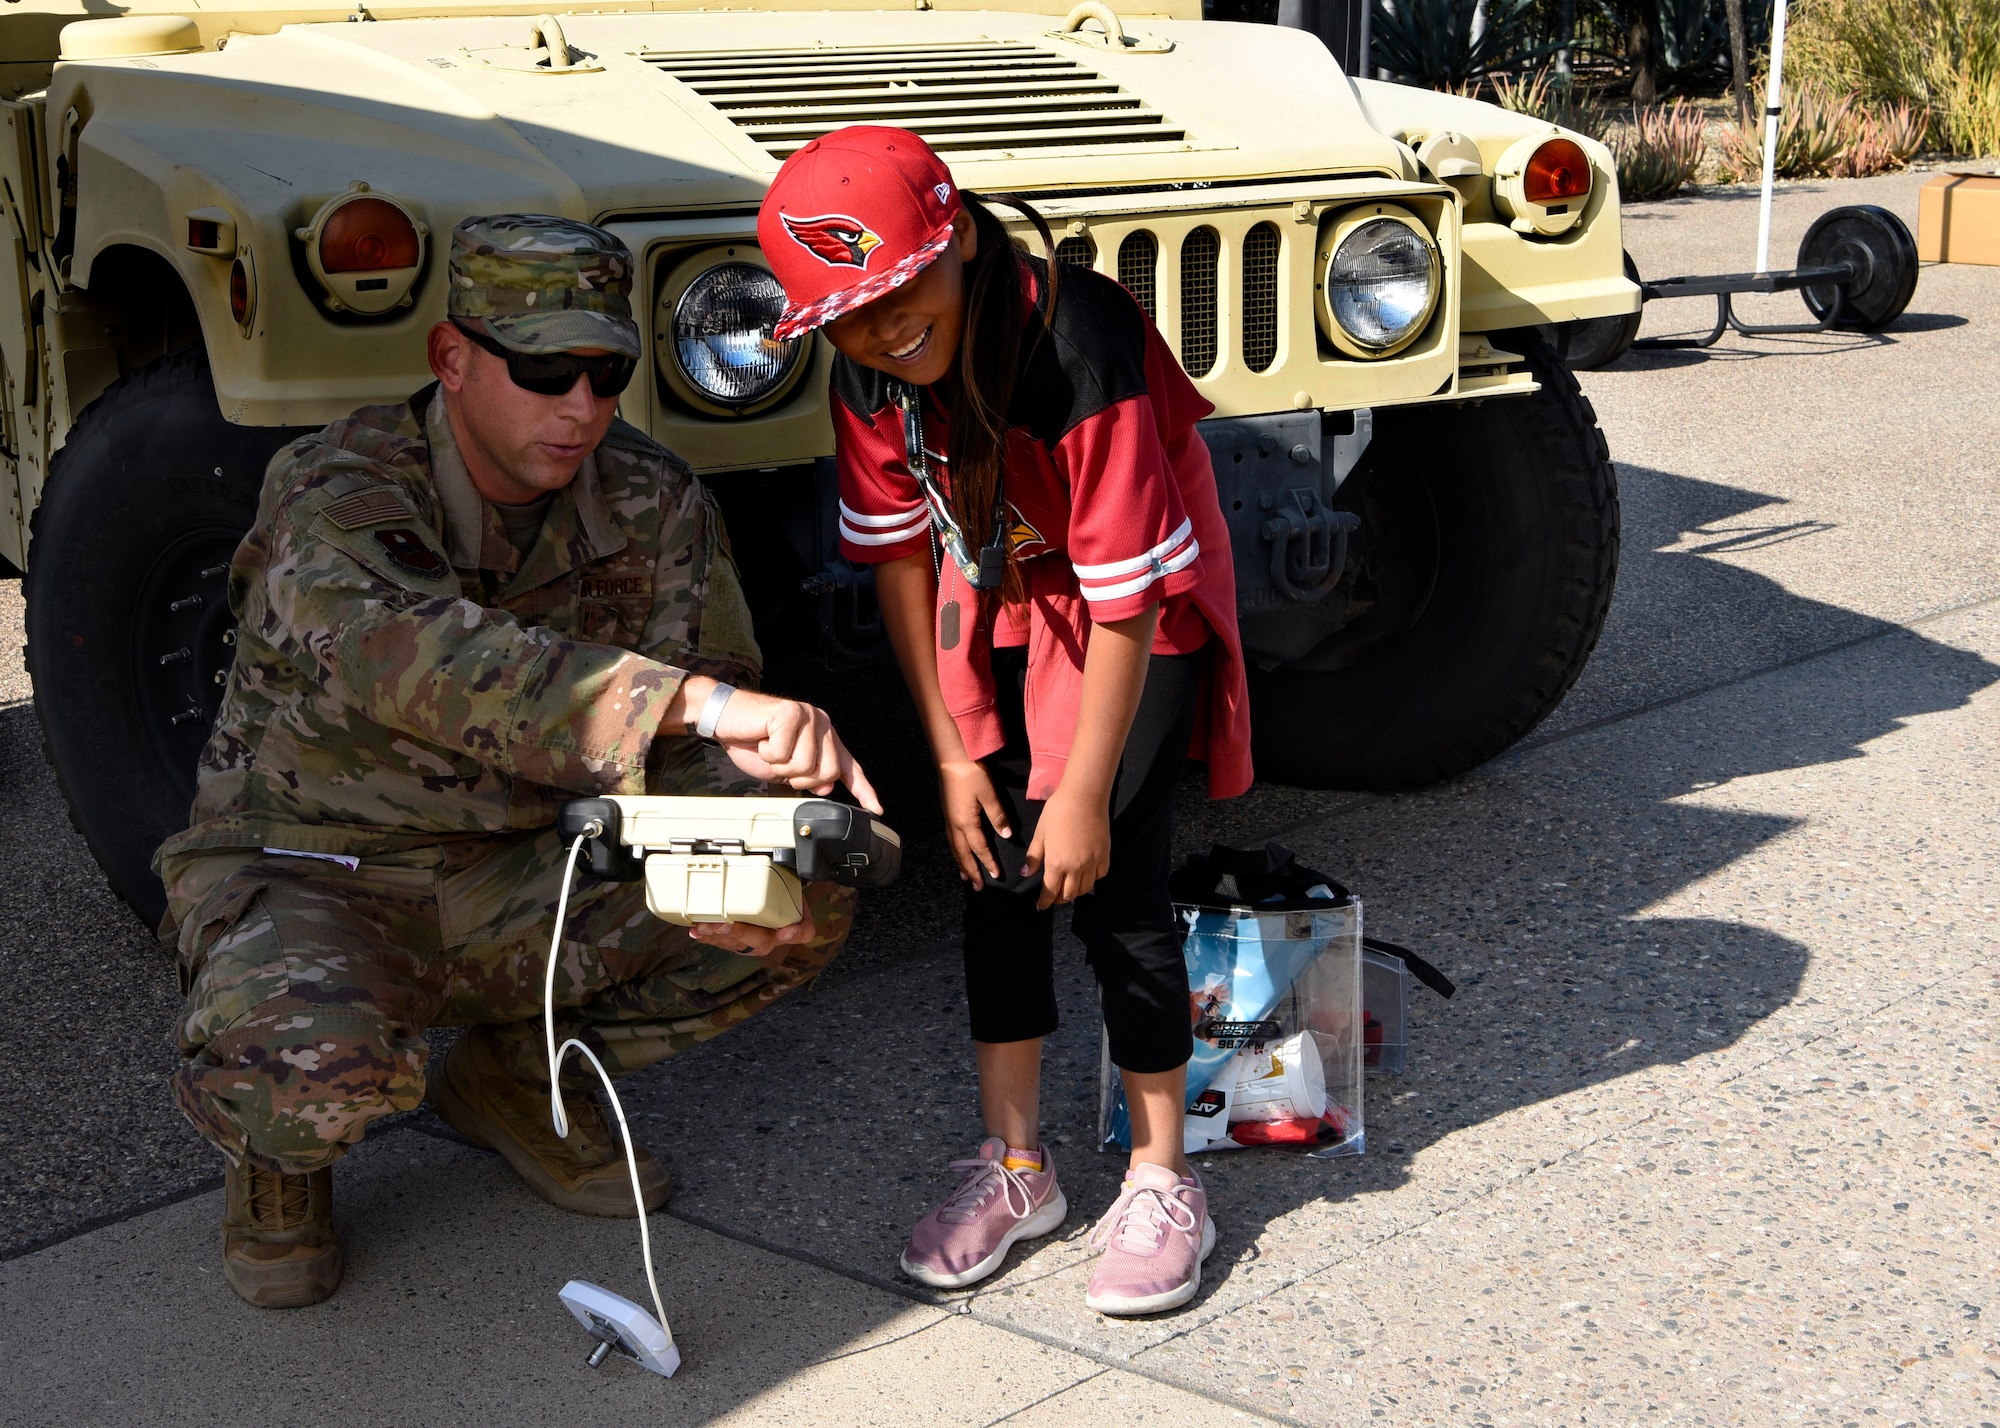 Tech. Sgt. Shane Bridges, 56th Civil Engineer Squadron Explosive Ordnance Disposal Airman, shows a young football fan how to operate an EOD robot before the Arizona Cardinals Salute to Service game, Nov. 18, 2018, at State Farm Stadium, Glendale, Ariz.